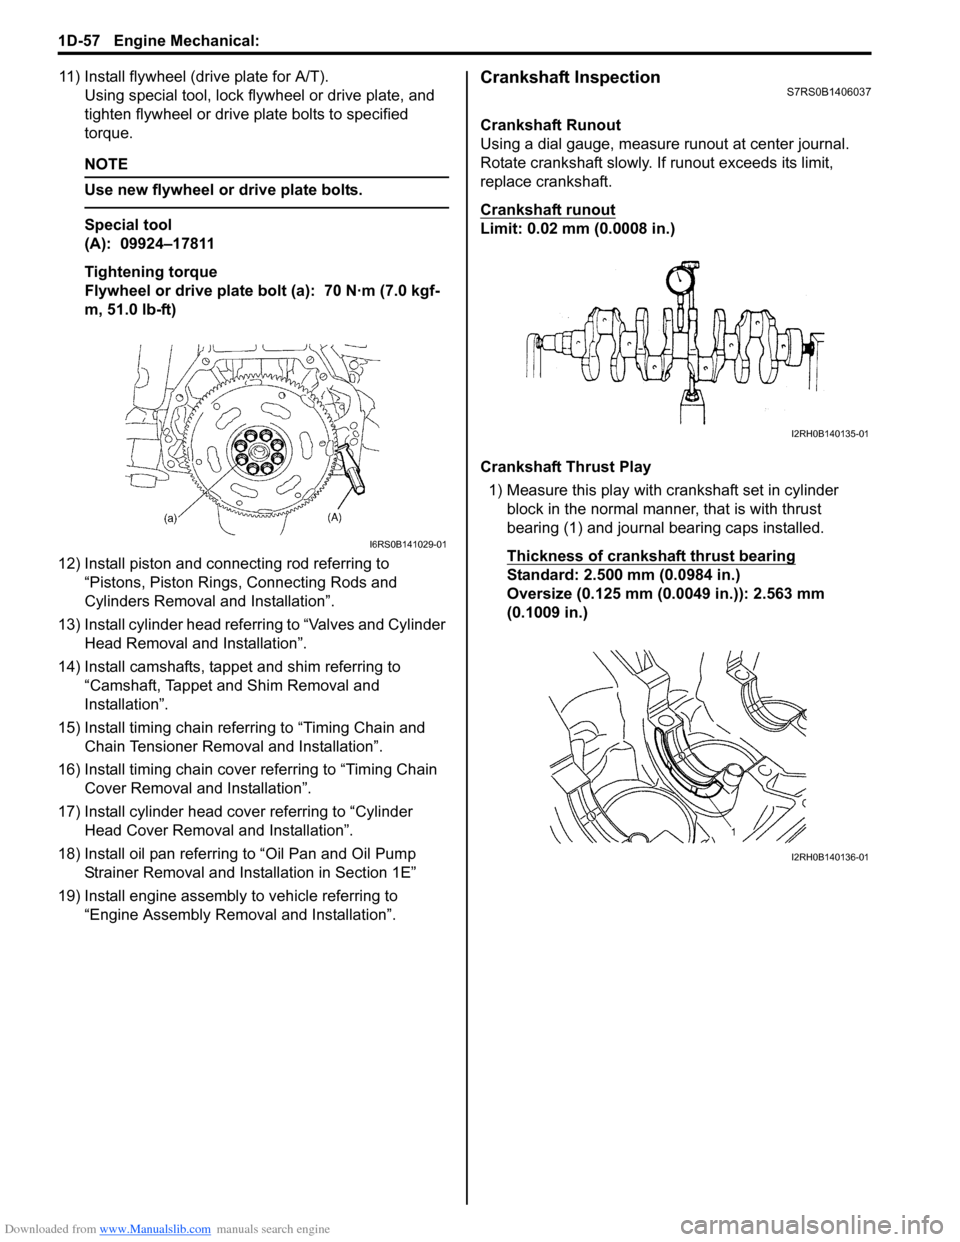 SUZUKI SWIFT 2005 2.G Service Workshop Manual Downloaded from www.Manualslib.com manuals search engine 1D-57 Engine Mechanical: 
11) Install flywheel (drive plate for A/T).Using special tool, lock flyw heel or drive plate, and 
tighten flywheel o